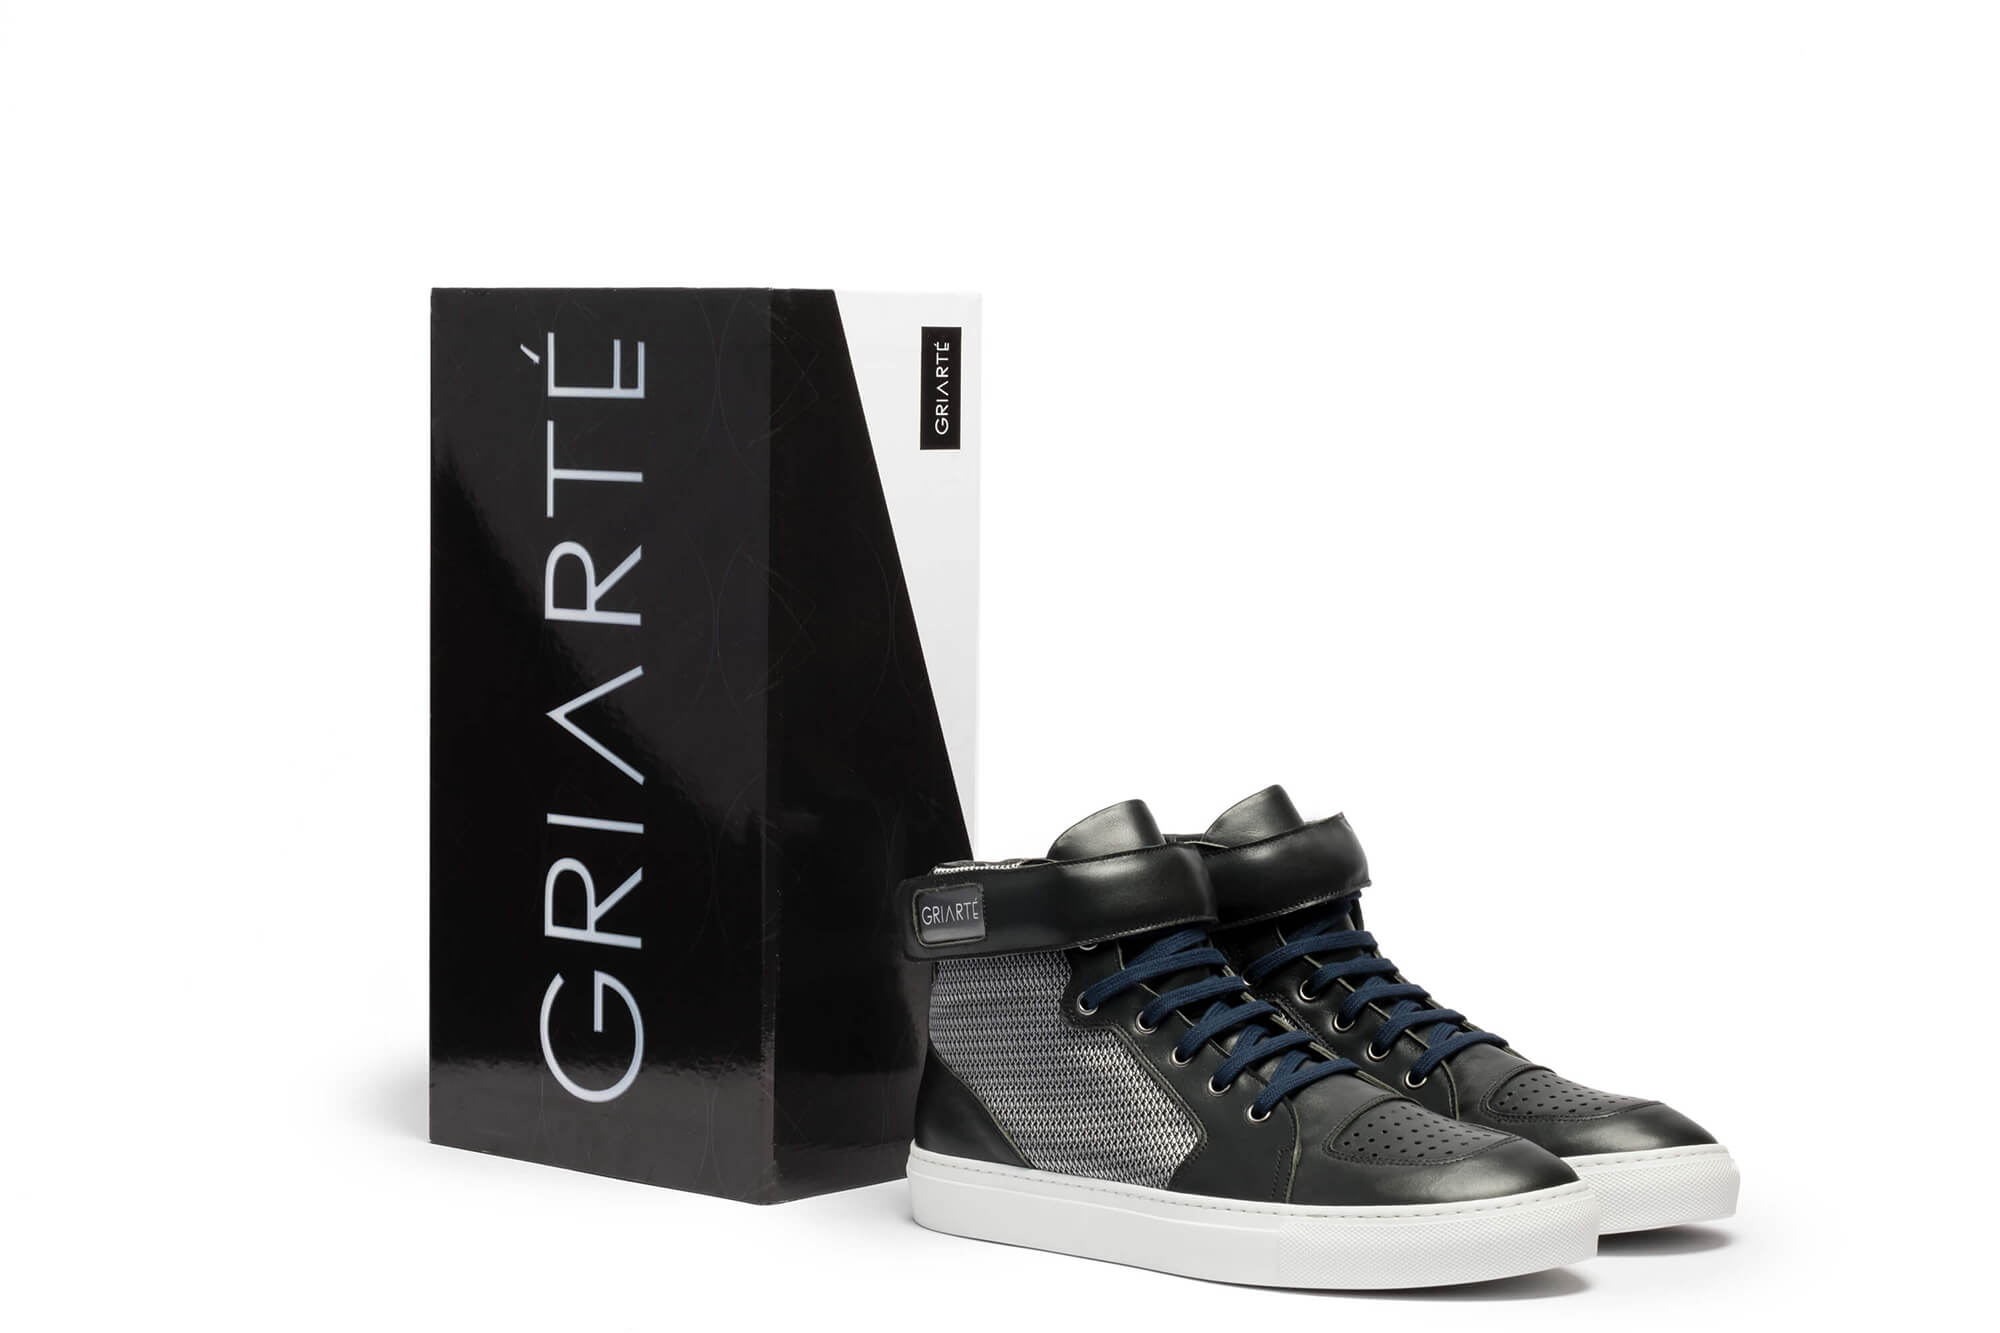 Griarte customized made in Italy sneakers by Caleb Smith